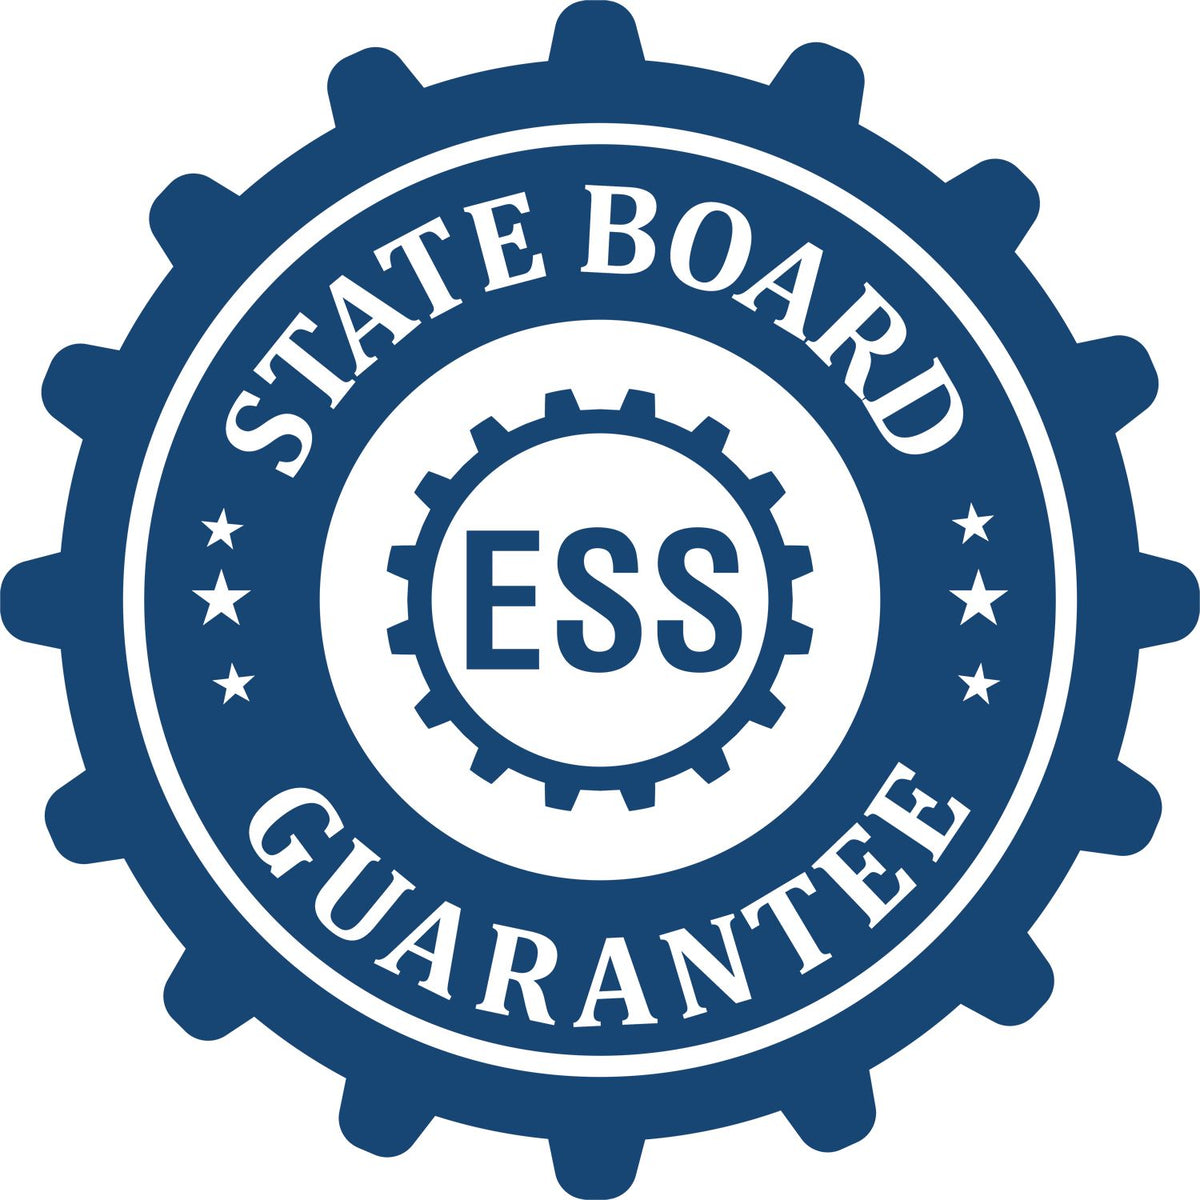 An emblem in a gear shape illustrating a state board guarantee for the Nevada Landscape Architectural Seal Stamp product.